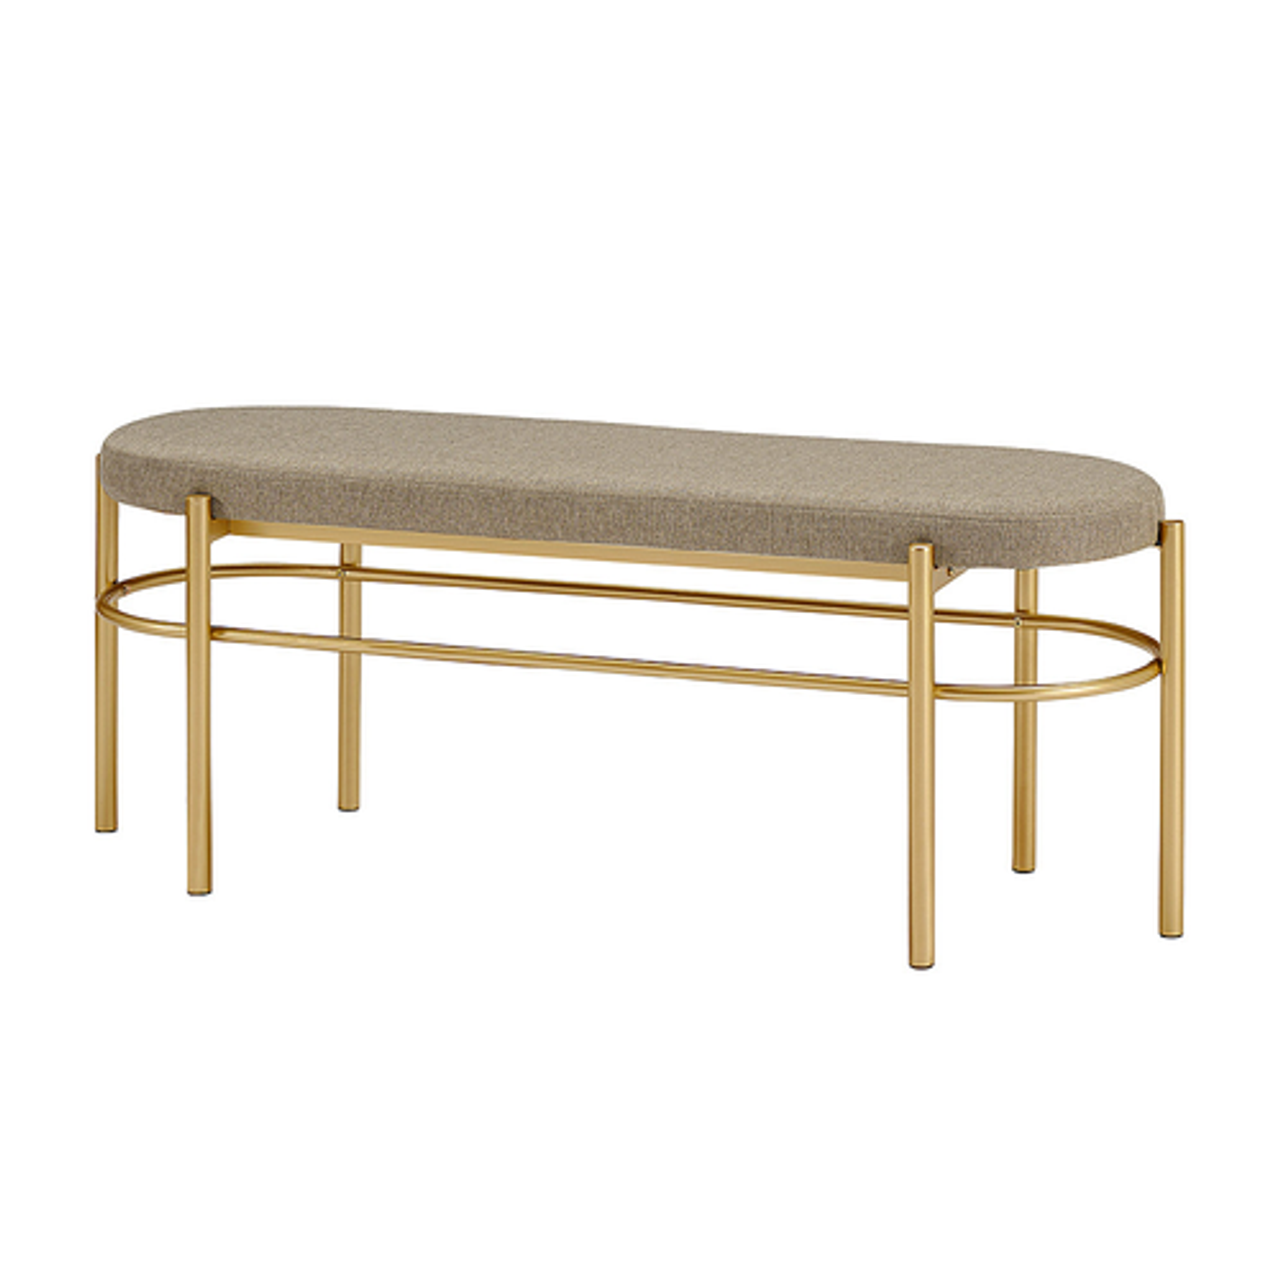 Walker Edison - Glam Bench with Cushion - Taupe